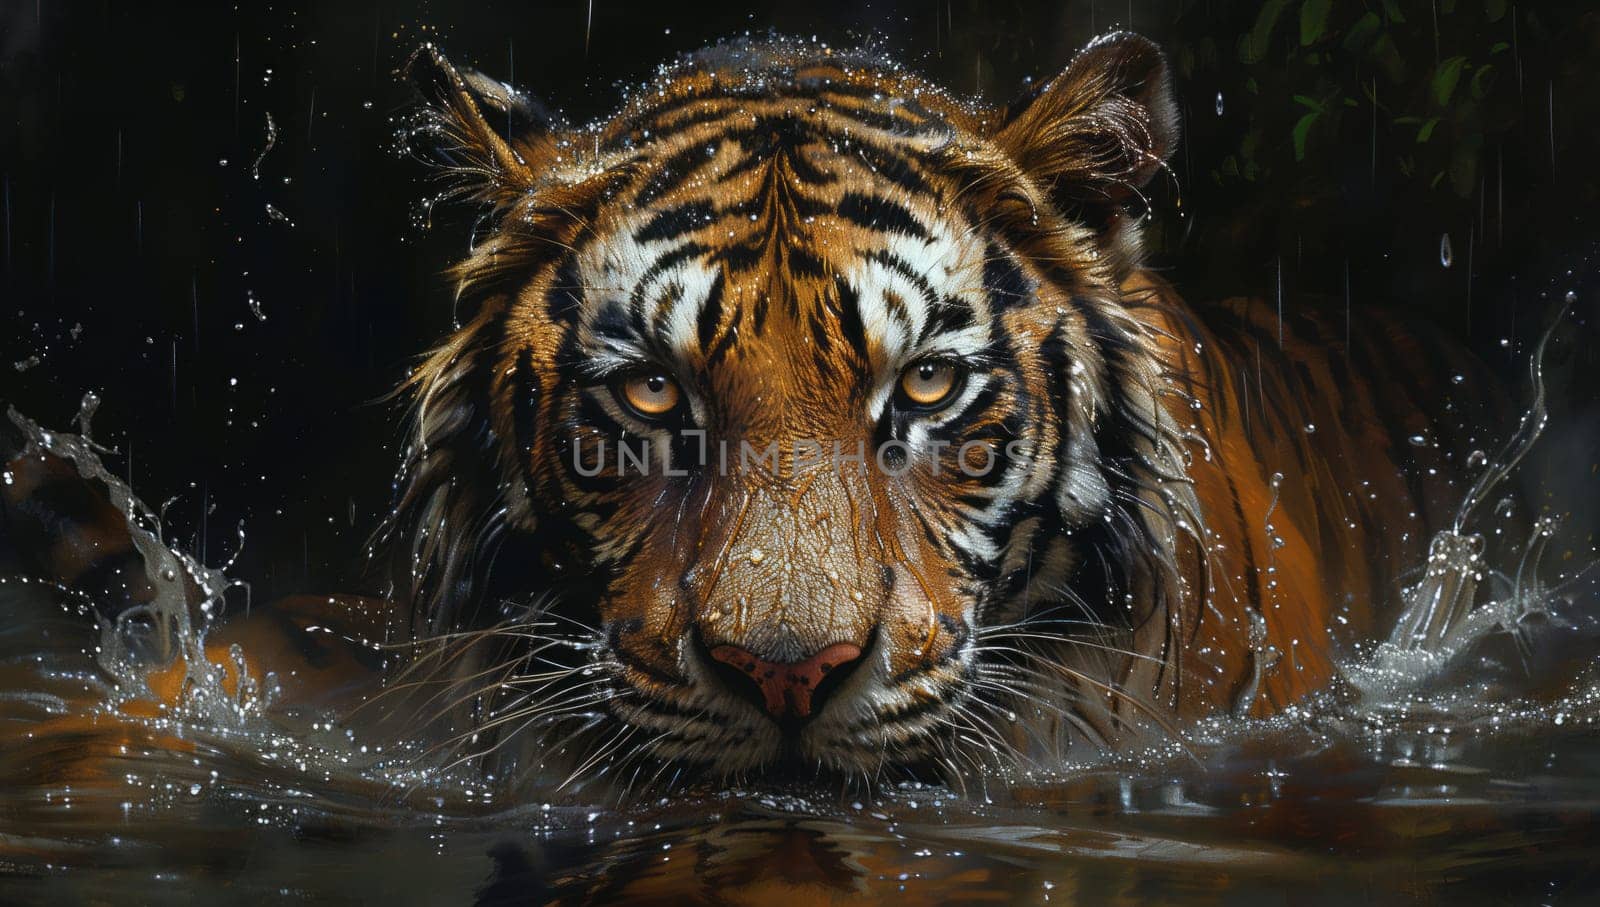 A Bengal tiger, a carnivorous organism of the Felidae family and a terrestrial animal, is swimming in the water, its whiskers glistening as it gazes at the camera